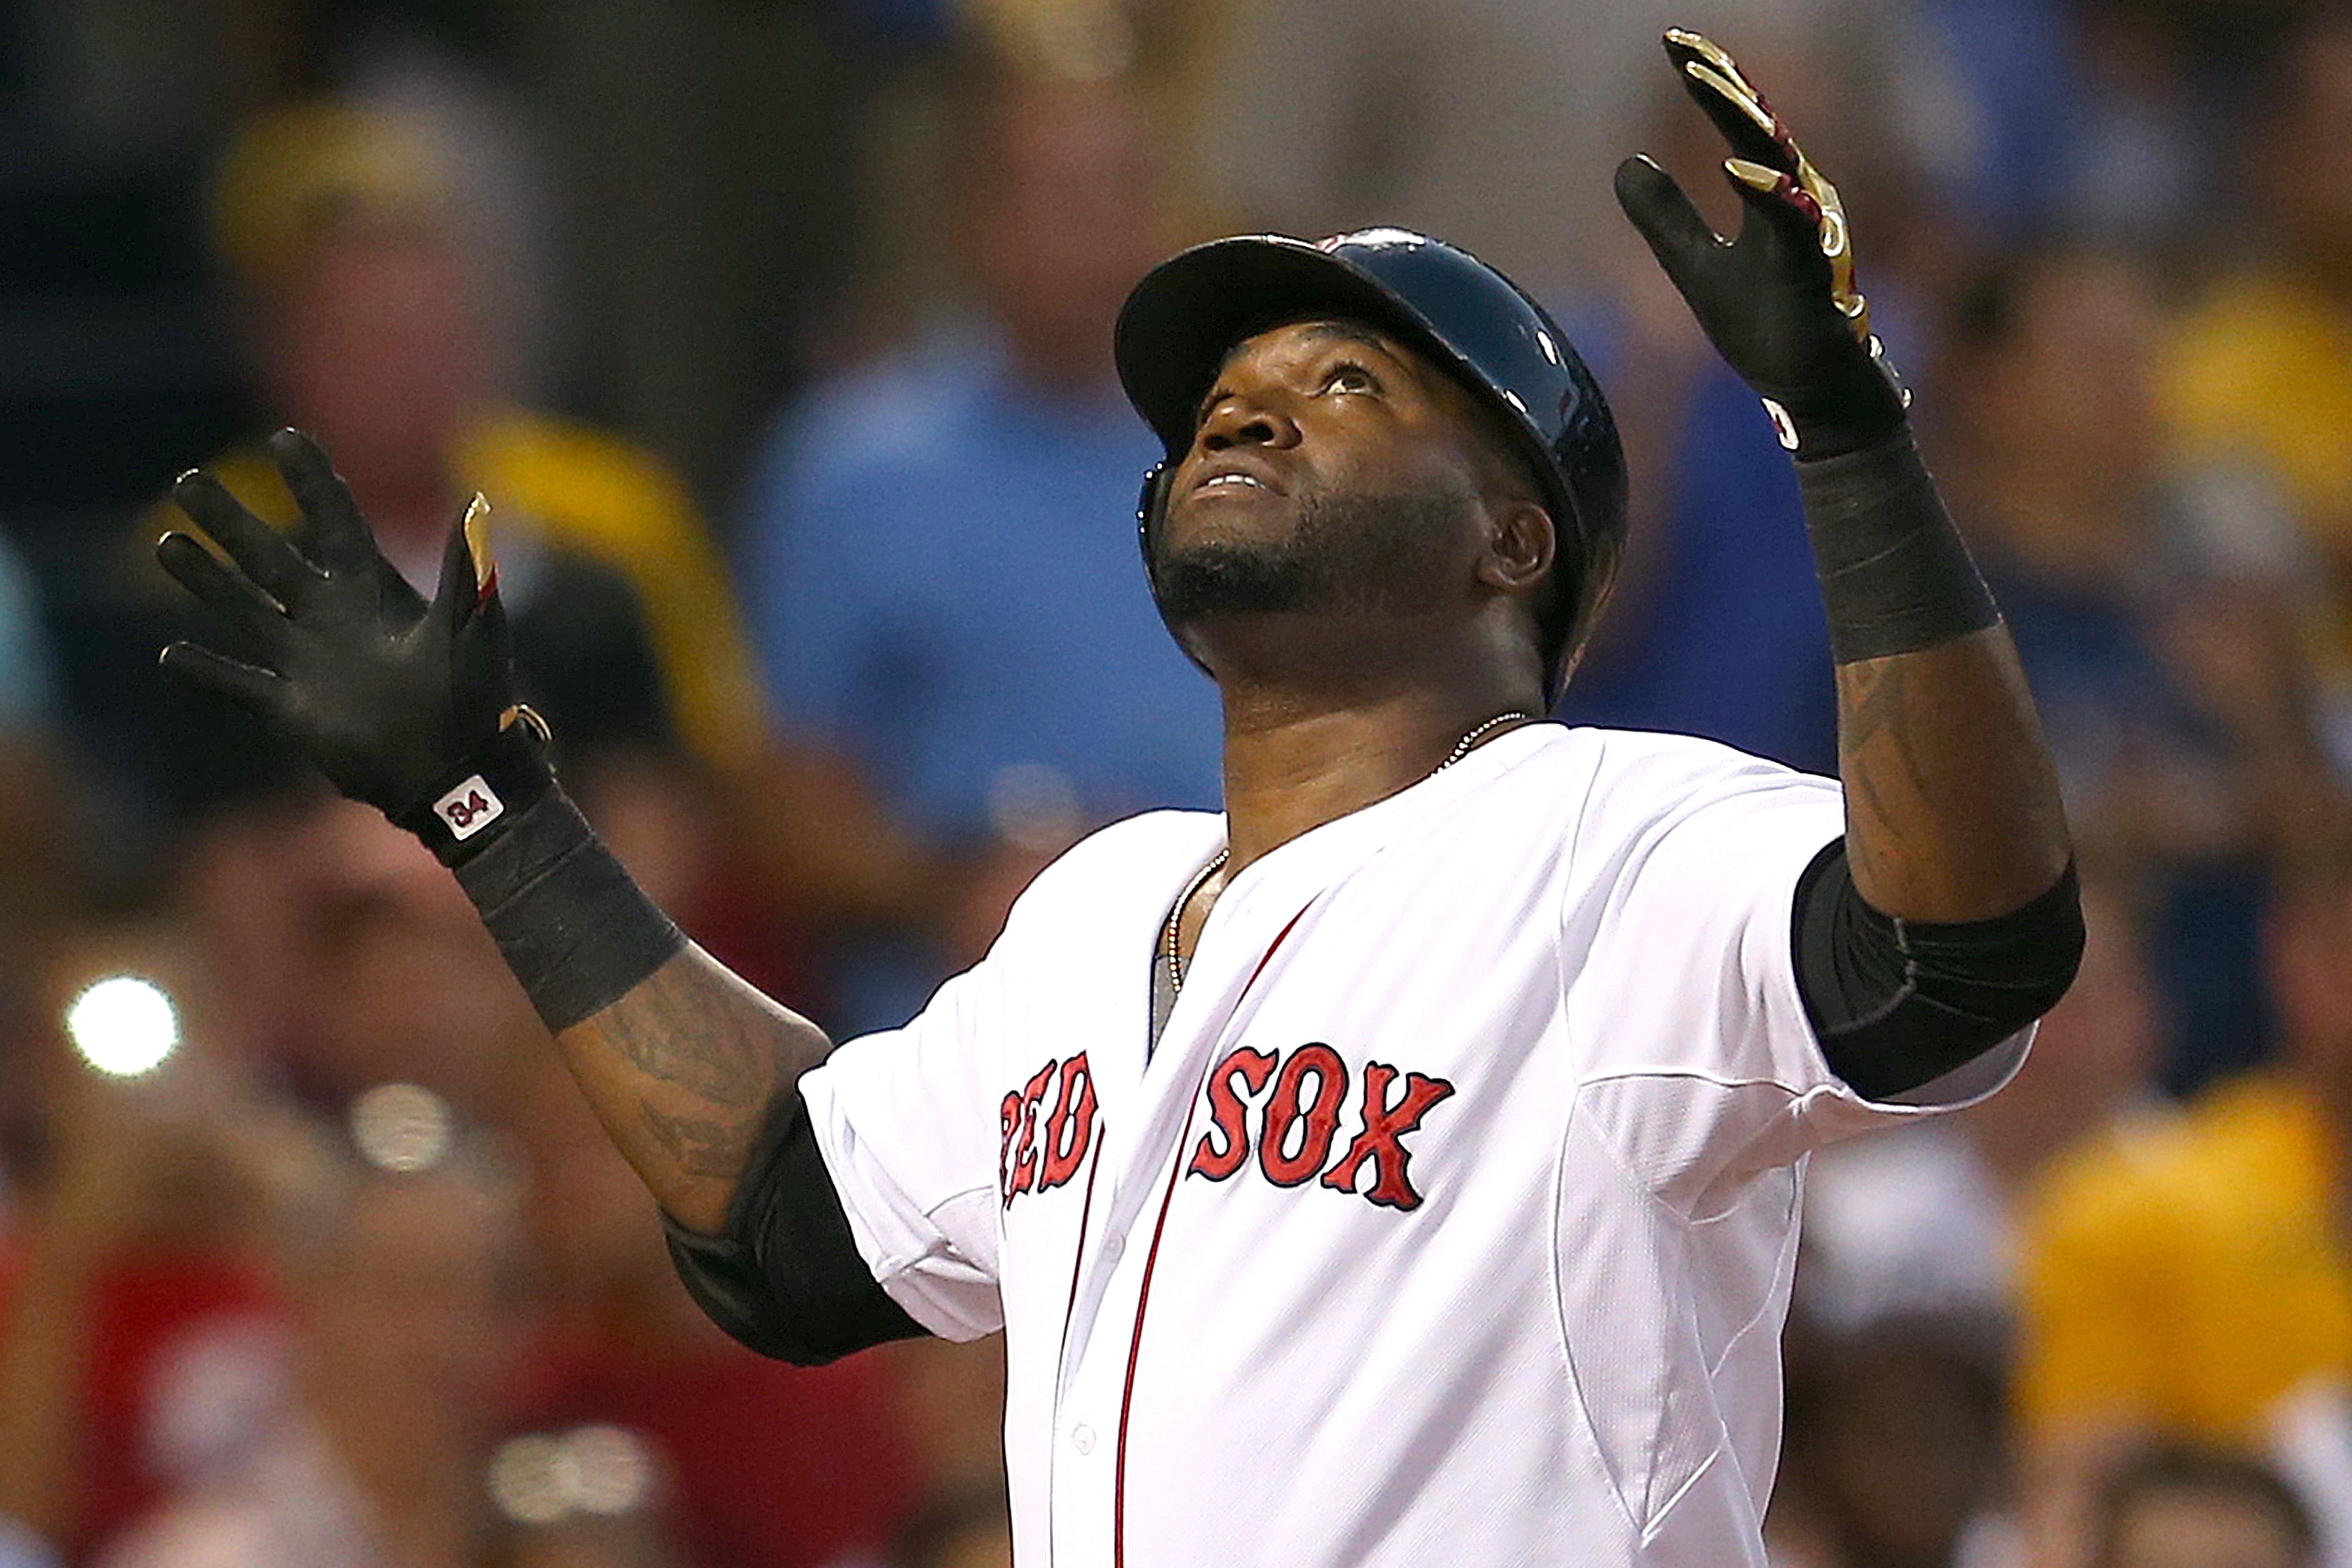 The Life And Career Of David Ortiz (Complete Story)